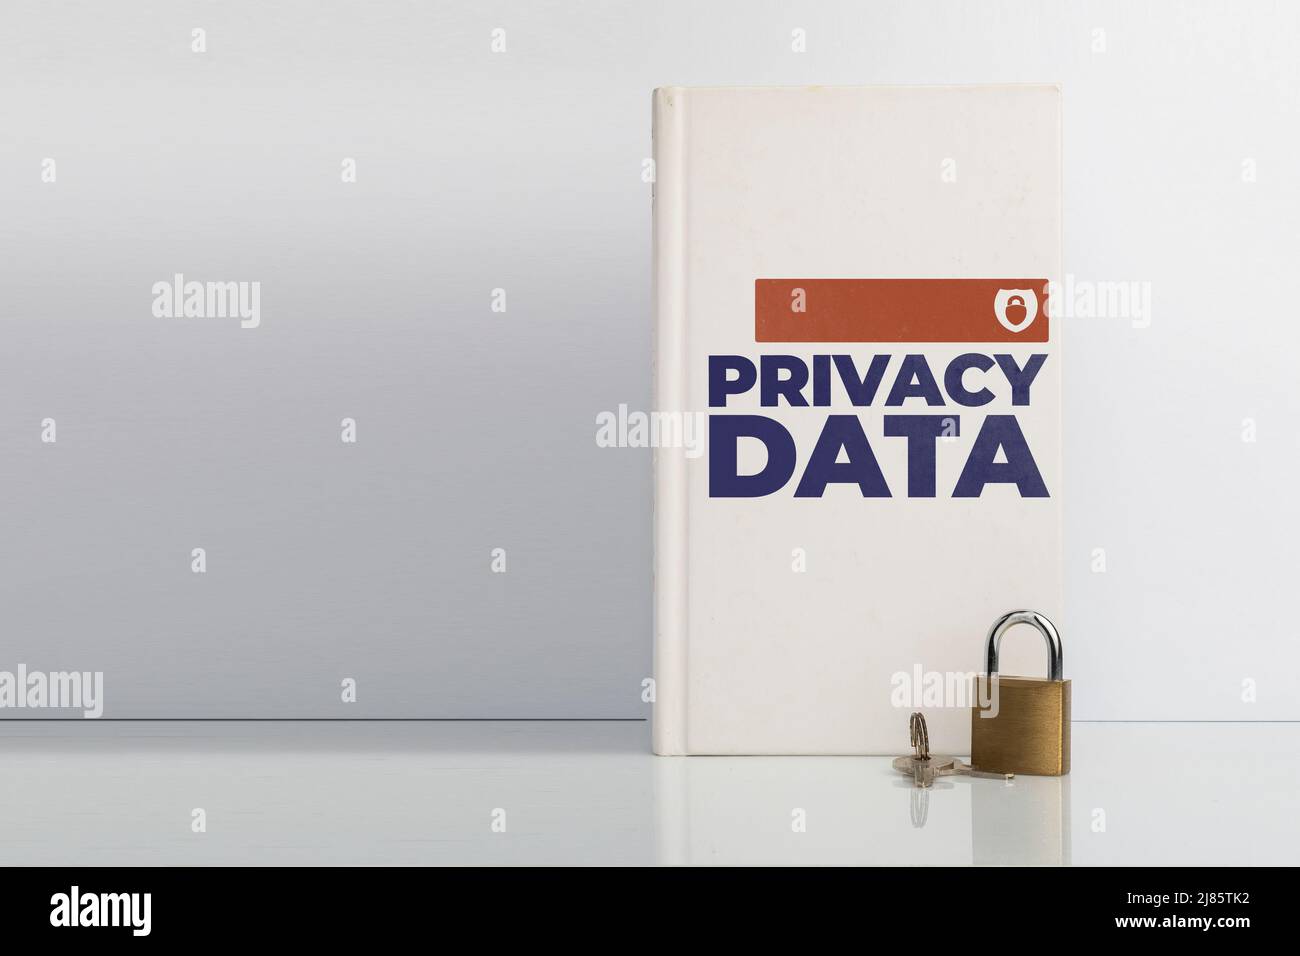 Privacy data protection concept, a lock in front of a book with the text: Privacy Data on its cover Stock Photo